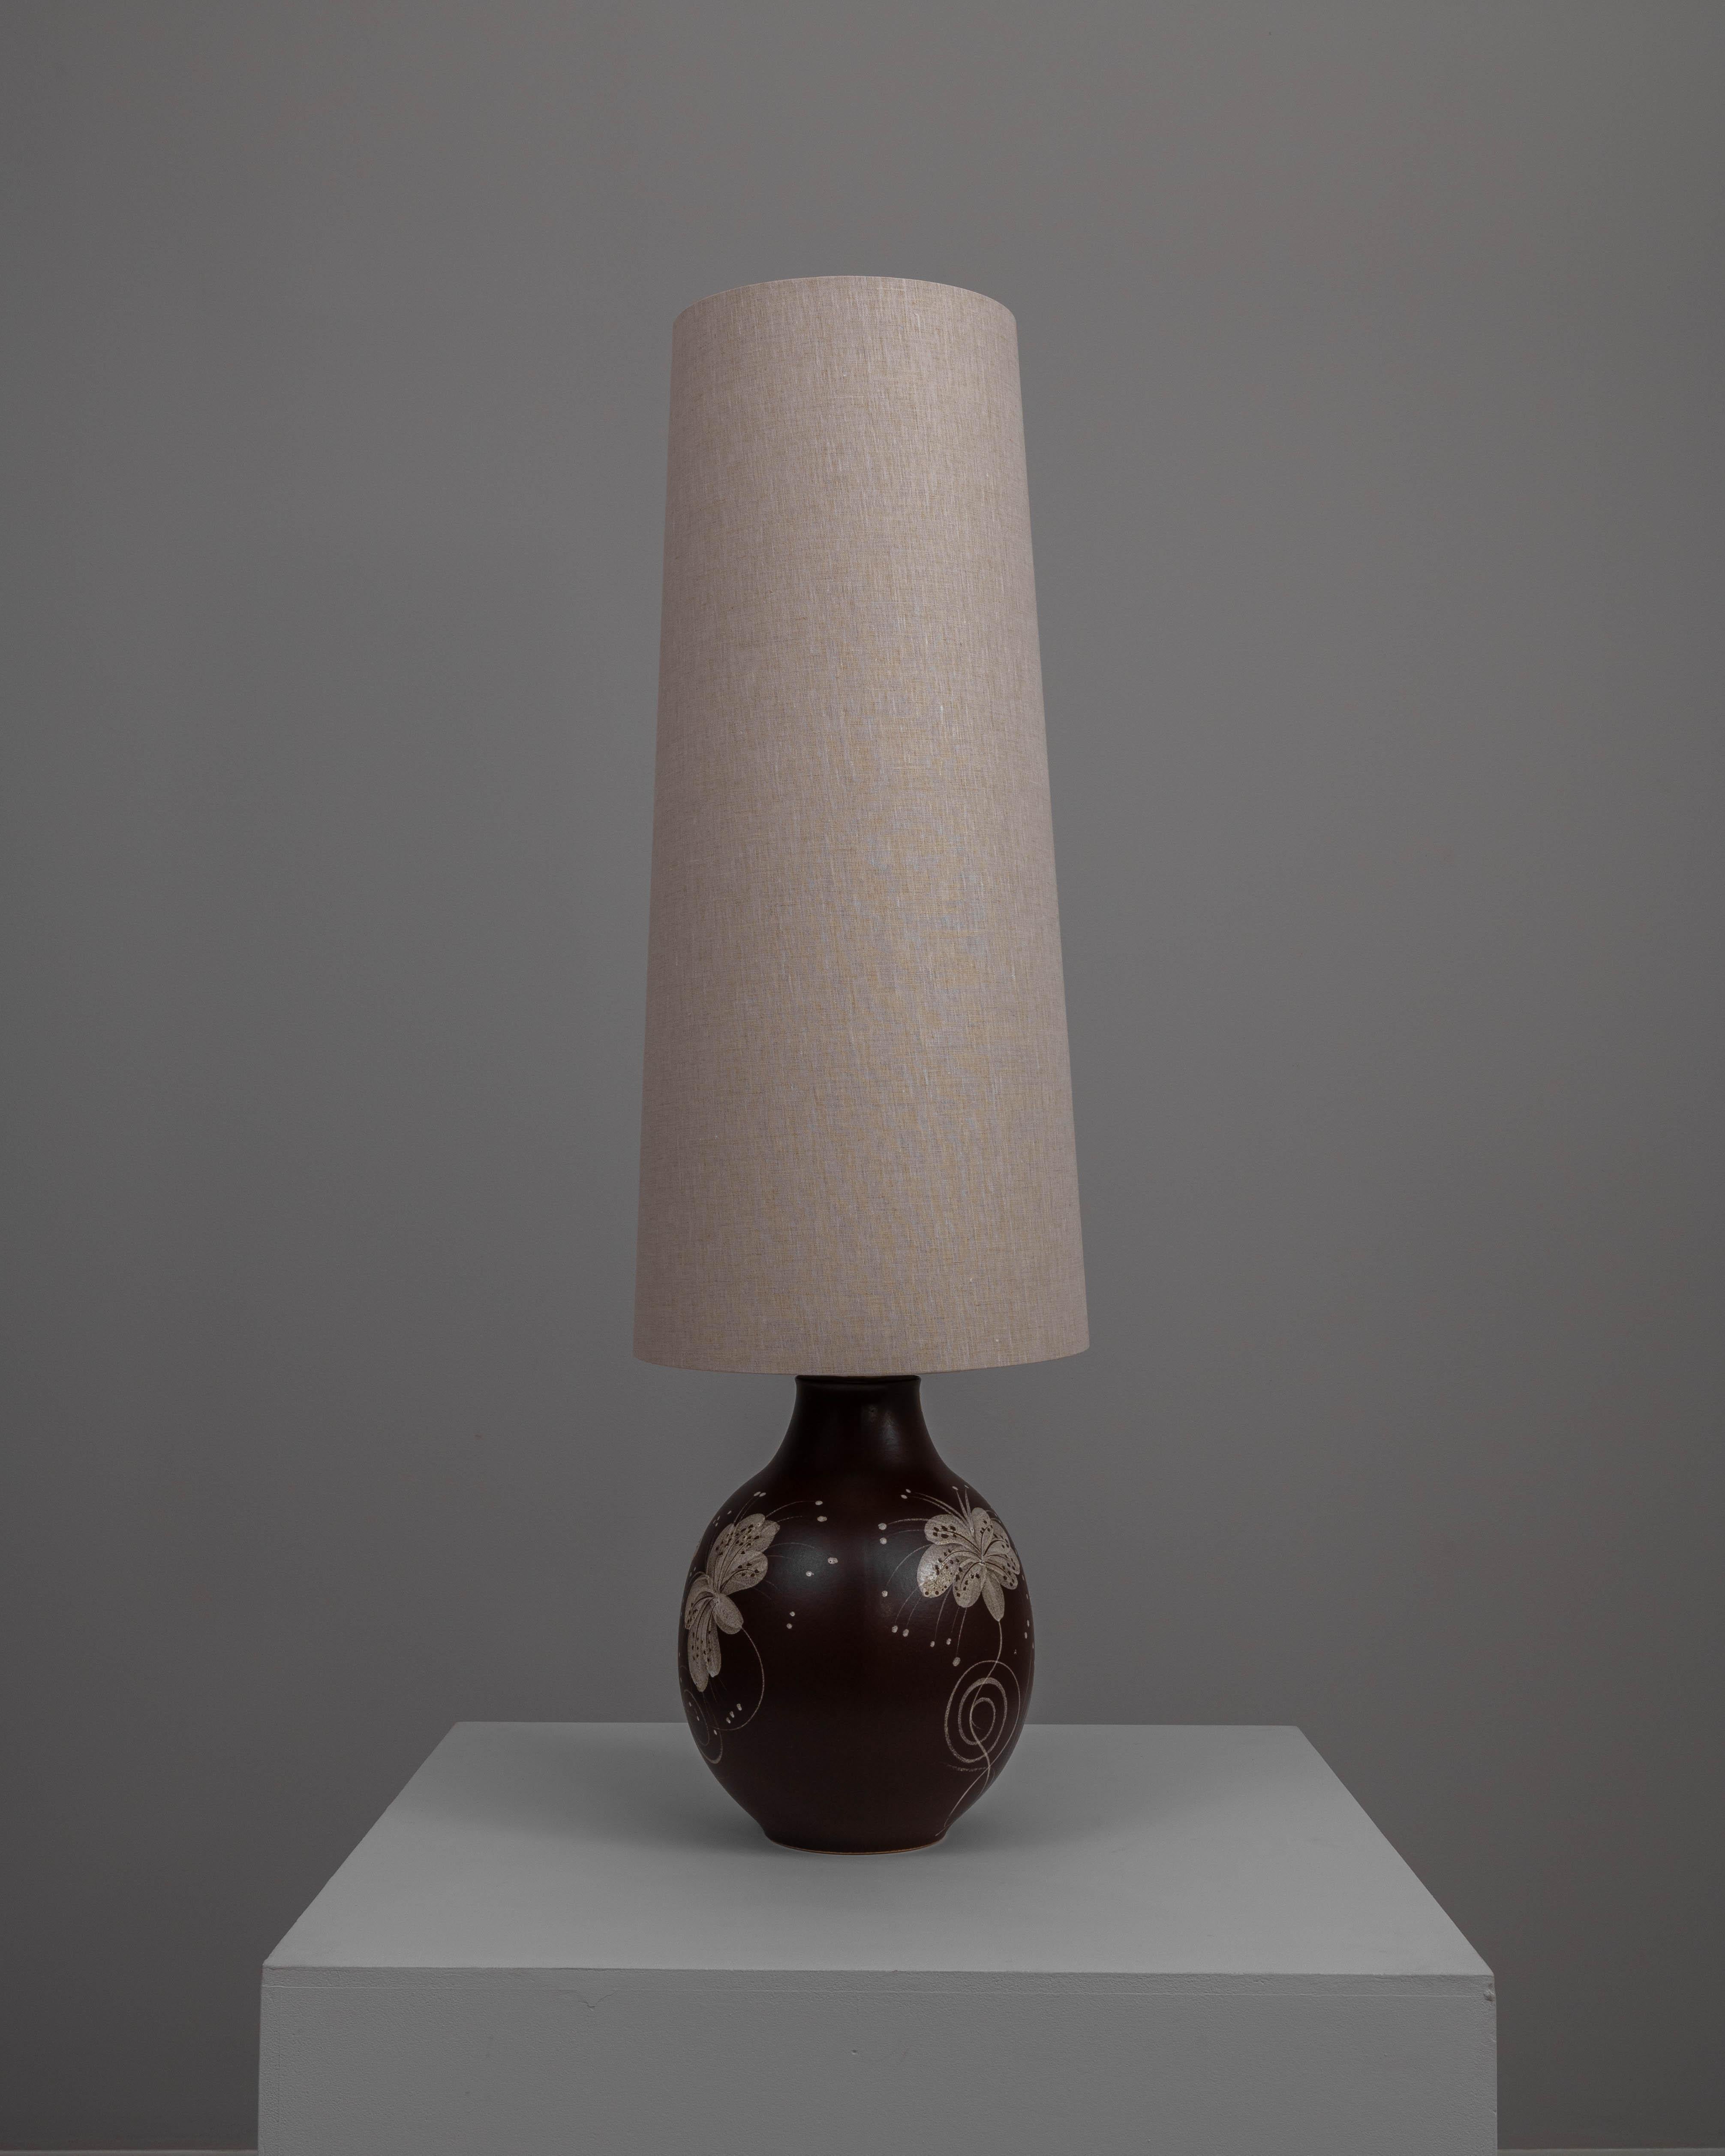 This 20th Century German Ceramic Table Lamp is an exquisite example of functional art. The ceramic base, rich in a deep brown hue, is adorned with delicate white floral motifs that add a touch of elegance and visual interest. These hand-painted